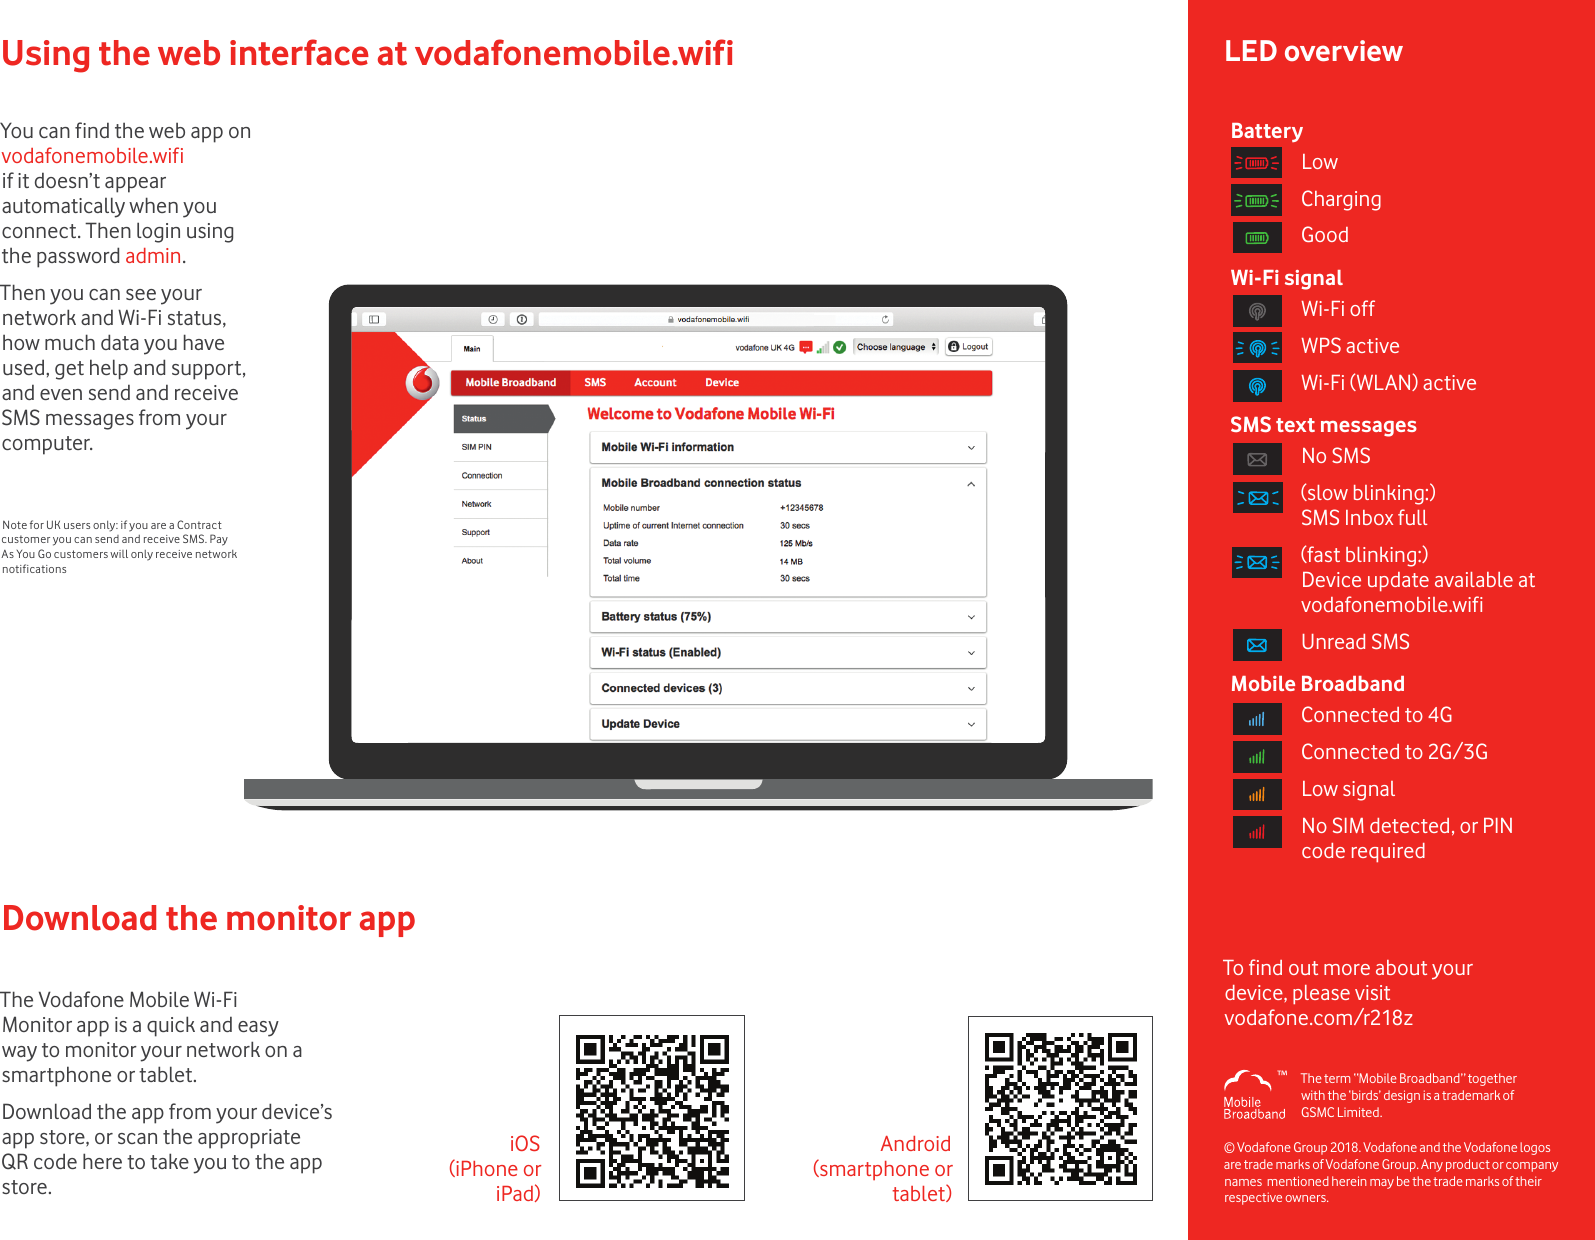 Download the monitor appThe Vodafone Mobile Wi-Fi Monitor app is a quick and easy way to monitor your network on a smartphone or tablet.Download the app from your device’s app store, or scan the appropriate QR code here to take you to the app store.iOS(iPhone or  iPad)Android(smartphone or tablet)™Using the web interface at vodafonemobile.wifiYou can find the web app on  vodafonemobile.wifi if it doesn’t appear automatically when you connect. Then login using the password admin.Then you can see your network and Wi-Fi status, how much data you have used, get help and support, and even send and receive SMS messages from your computer.Note for UK users only: if you are a Contract customer you can send and receive SMS. Pay As You Go customers will only receive network notificationsLED overviewTo find out more about your  device, please visit  vodafone.com/r218zBatteryLowChargingGoodWi-Fi signalWi-Fi offWPS activeWi-Fi (WLAN) activeSMS text messagesNo SMS(slow blinking:) SMS Inbox full(fast blinking:) Device update available at vodafonemobile.wifiUnread SMSMobile BroadbandConnected to 4GConnected to 2G/3GLow signalNo SIM detected, or PIN code required© Vodafone Group 2018. Vodafone and the Vodafone logos  are trade marks of Vodafone Group. Any product or company names  mentioned herein may be the trade marks of their respective owners.The term “Mobile Broadband” together  with the ‘birds’ design is a trademark of  GSMC Limited.